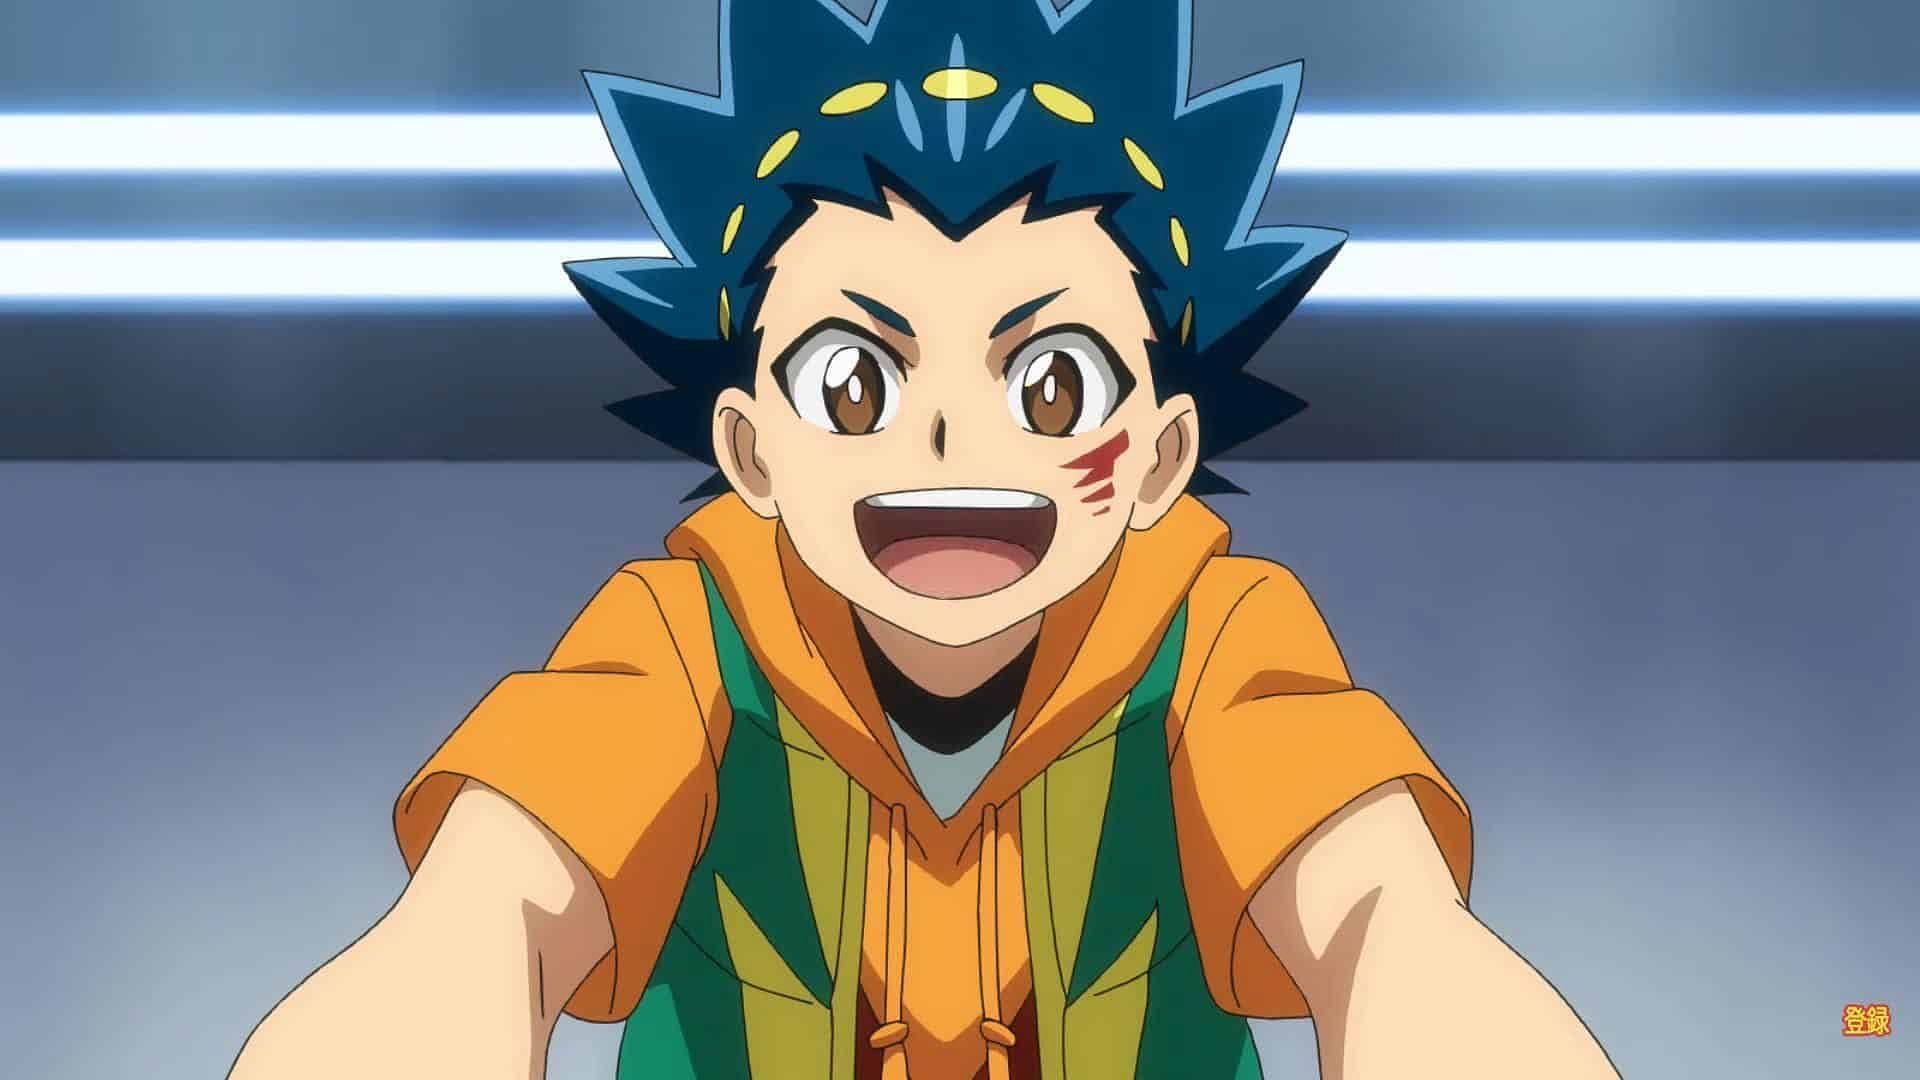 Beyblade X anime announces release date, cast, and more in latest PV (Image via OLM)